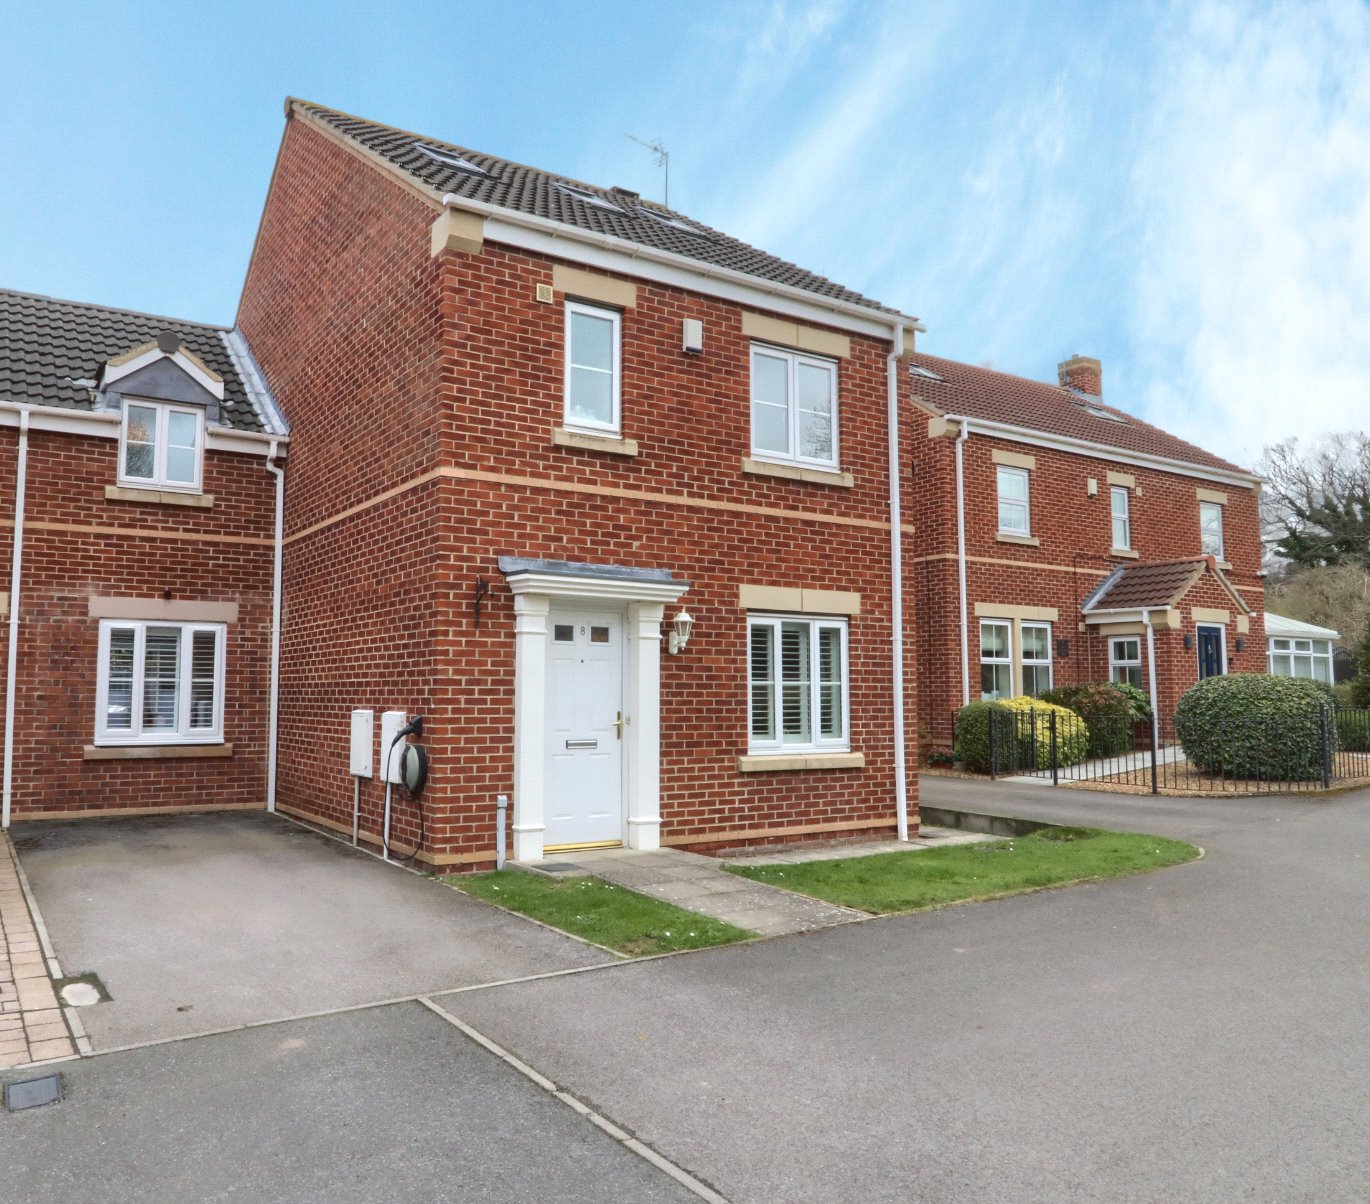 4 bed house for sale in The Hastings, Normanby  - Property Image 1